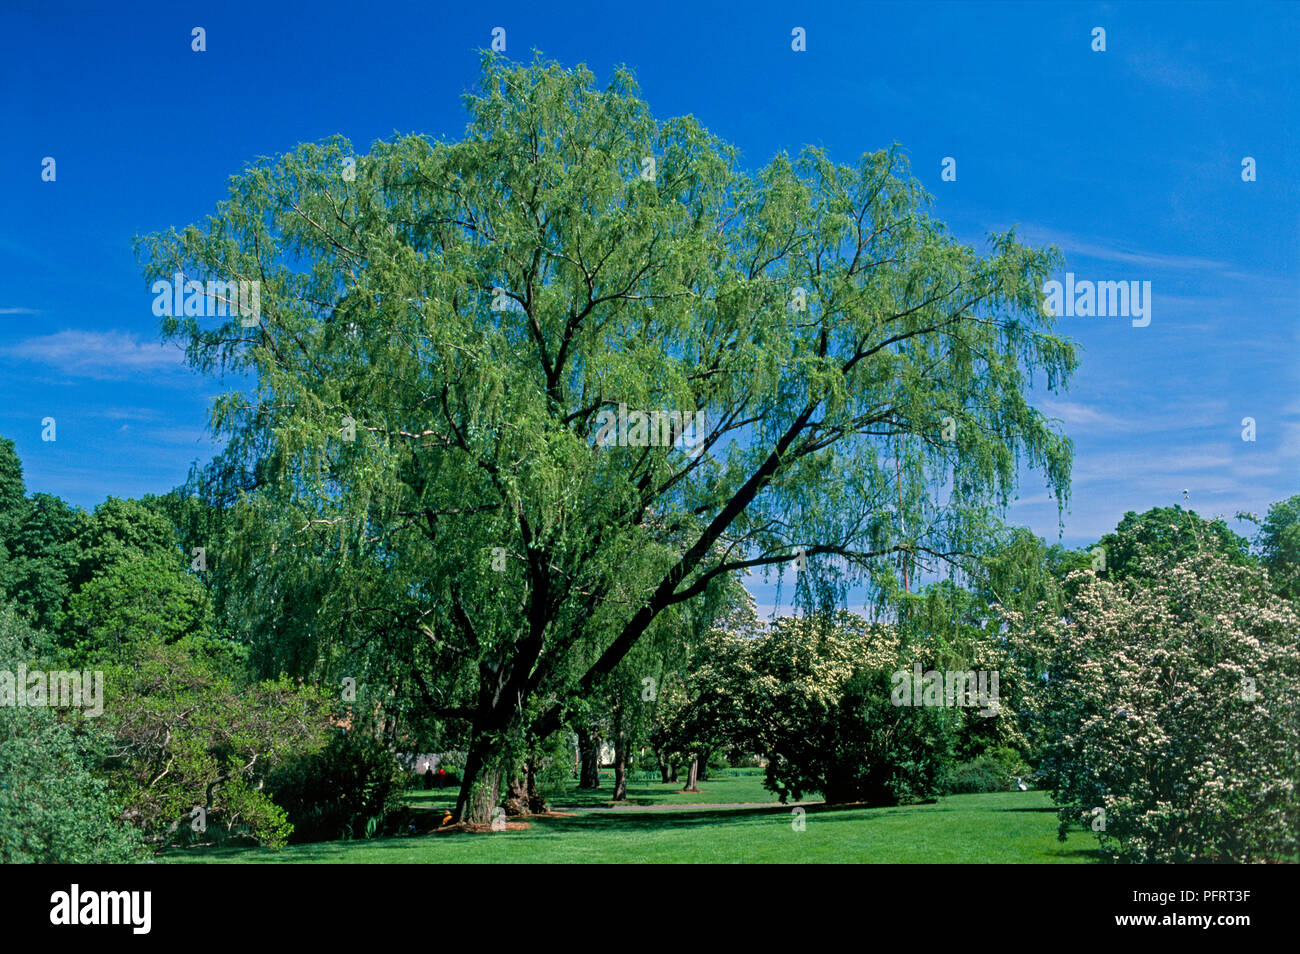 Salix alba 'Tristis', a large weeping Willow tree set in formal garden surrounded by smaller trees, shrubs and grass Stock Photo